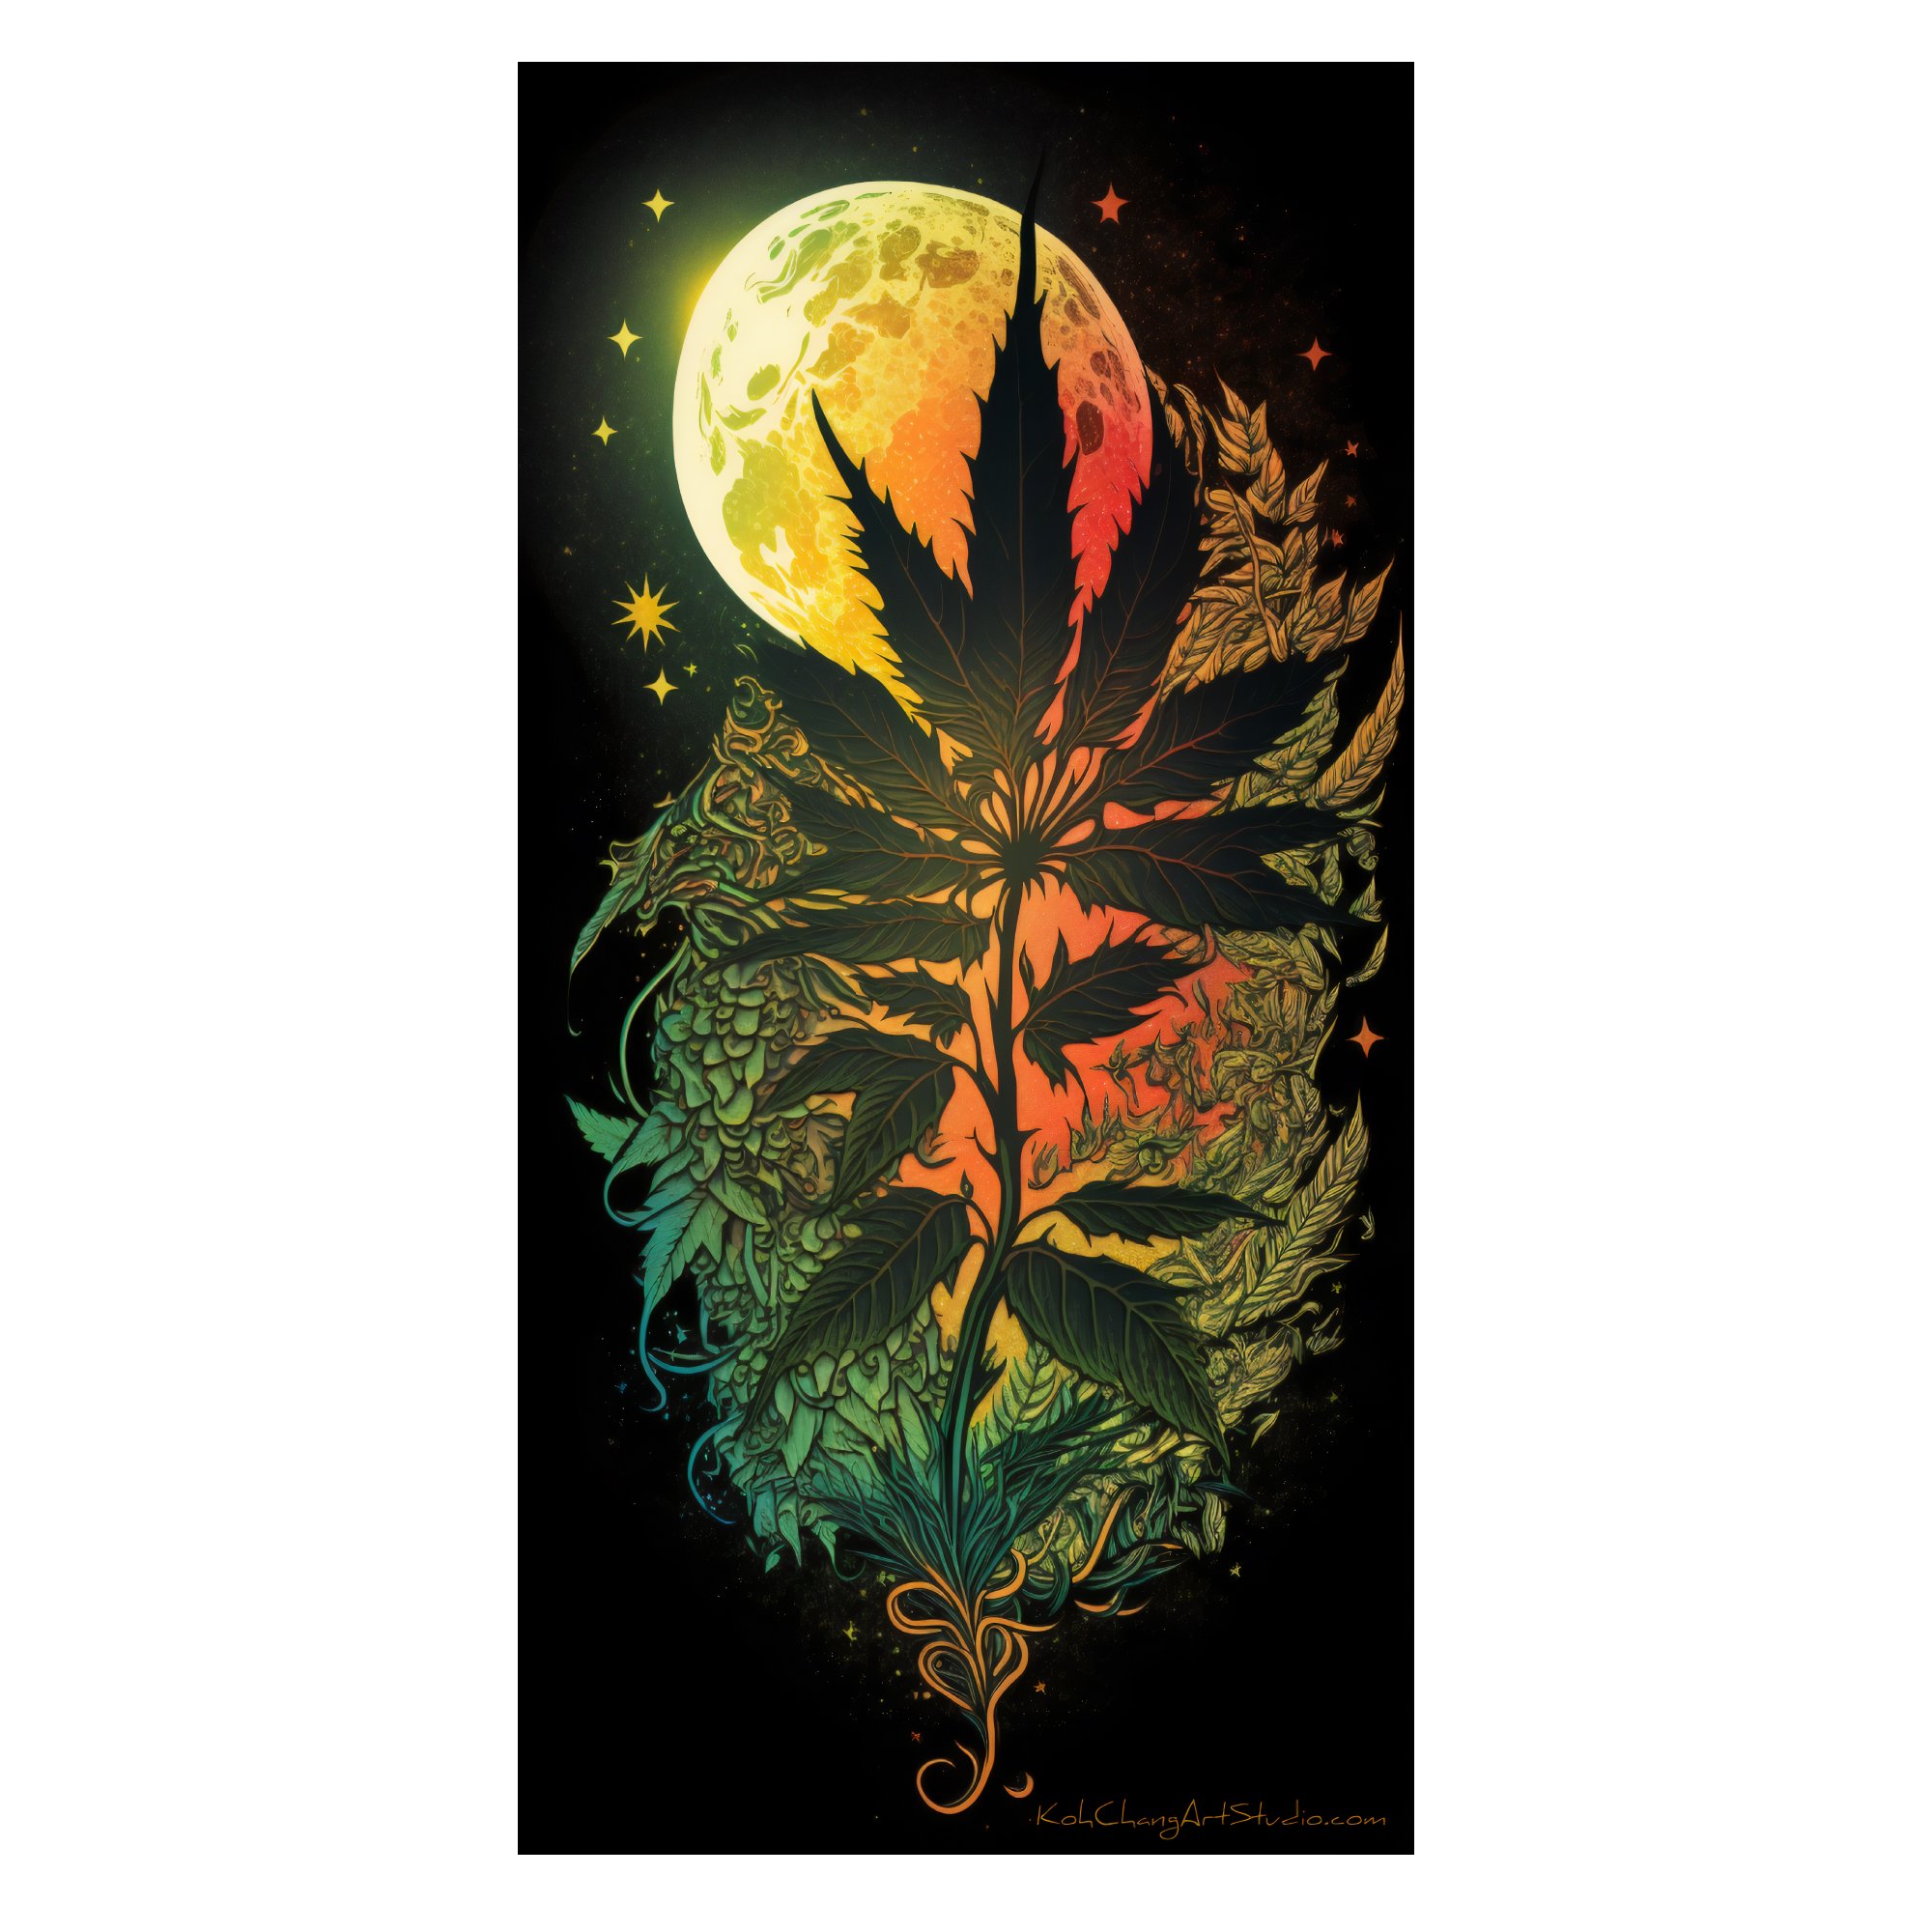 GREENLIT MOON Artistic Design - Moon and leaf in radiant splendor, symbolizing the balance between cosmos and nature.